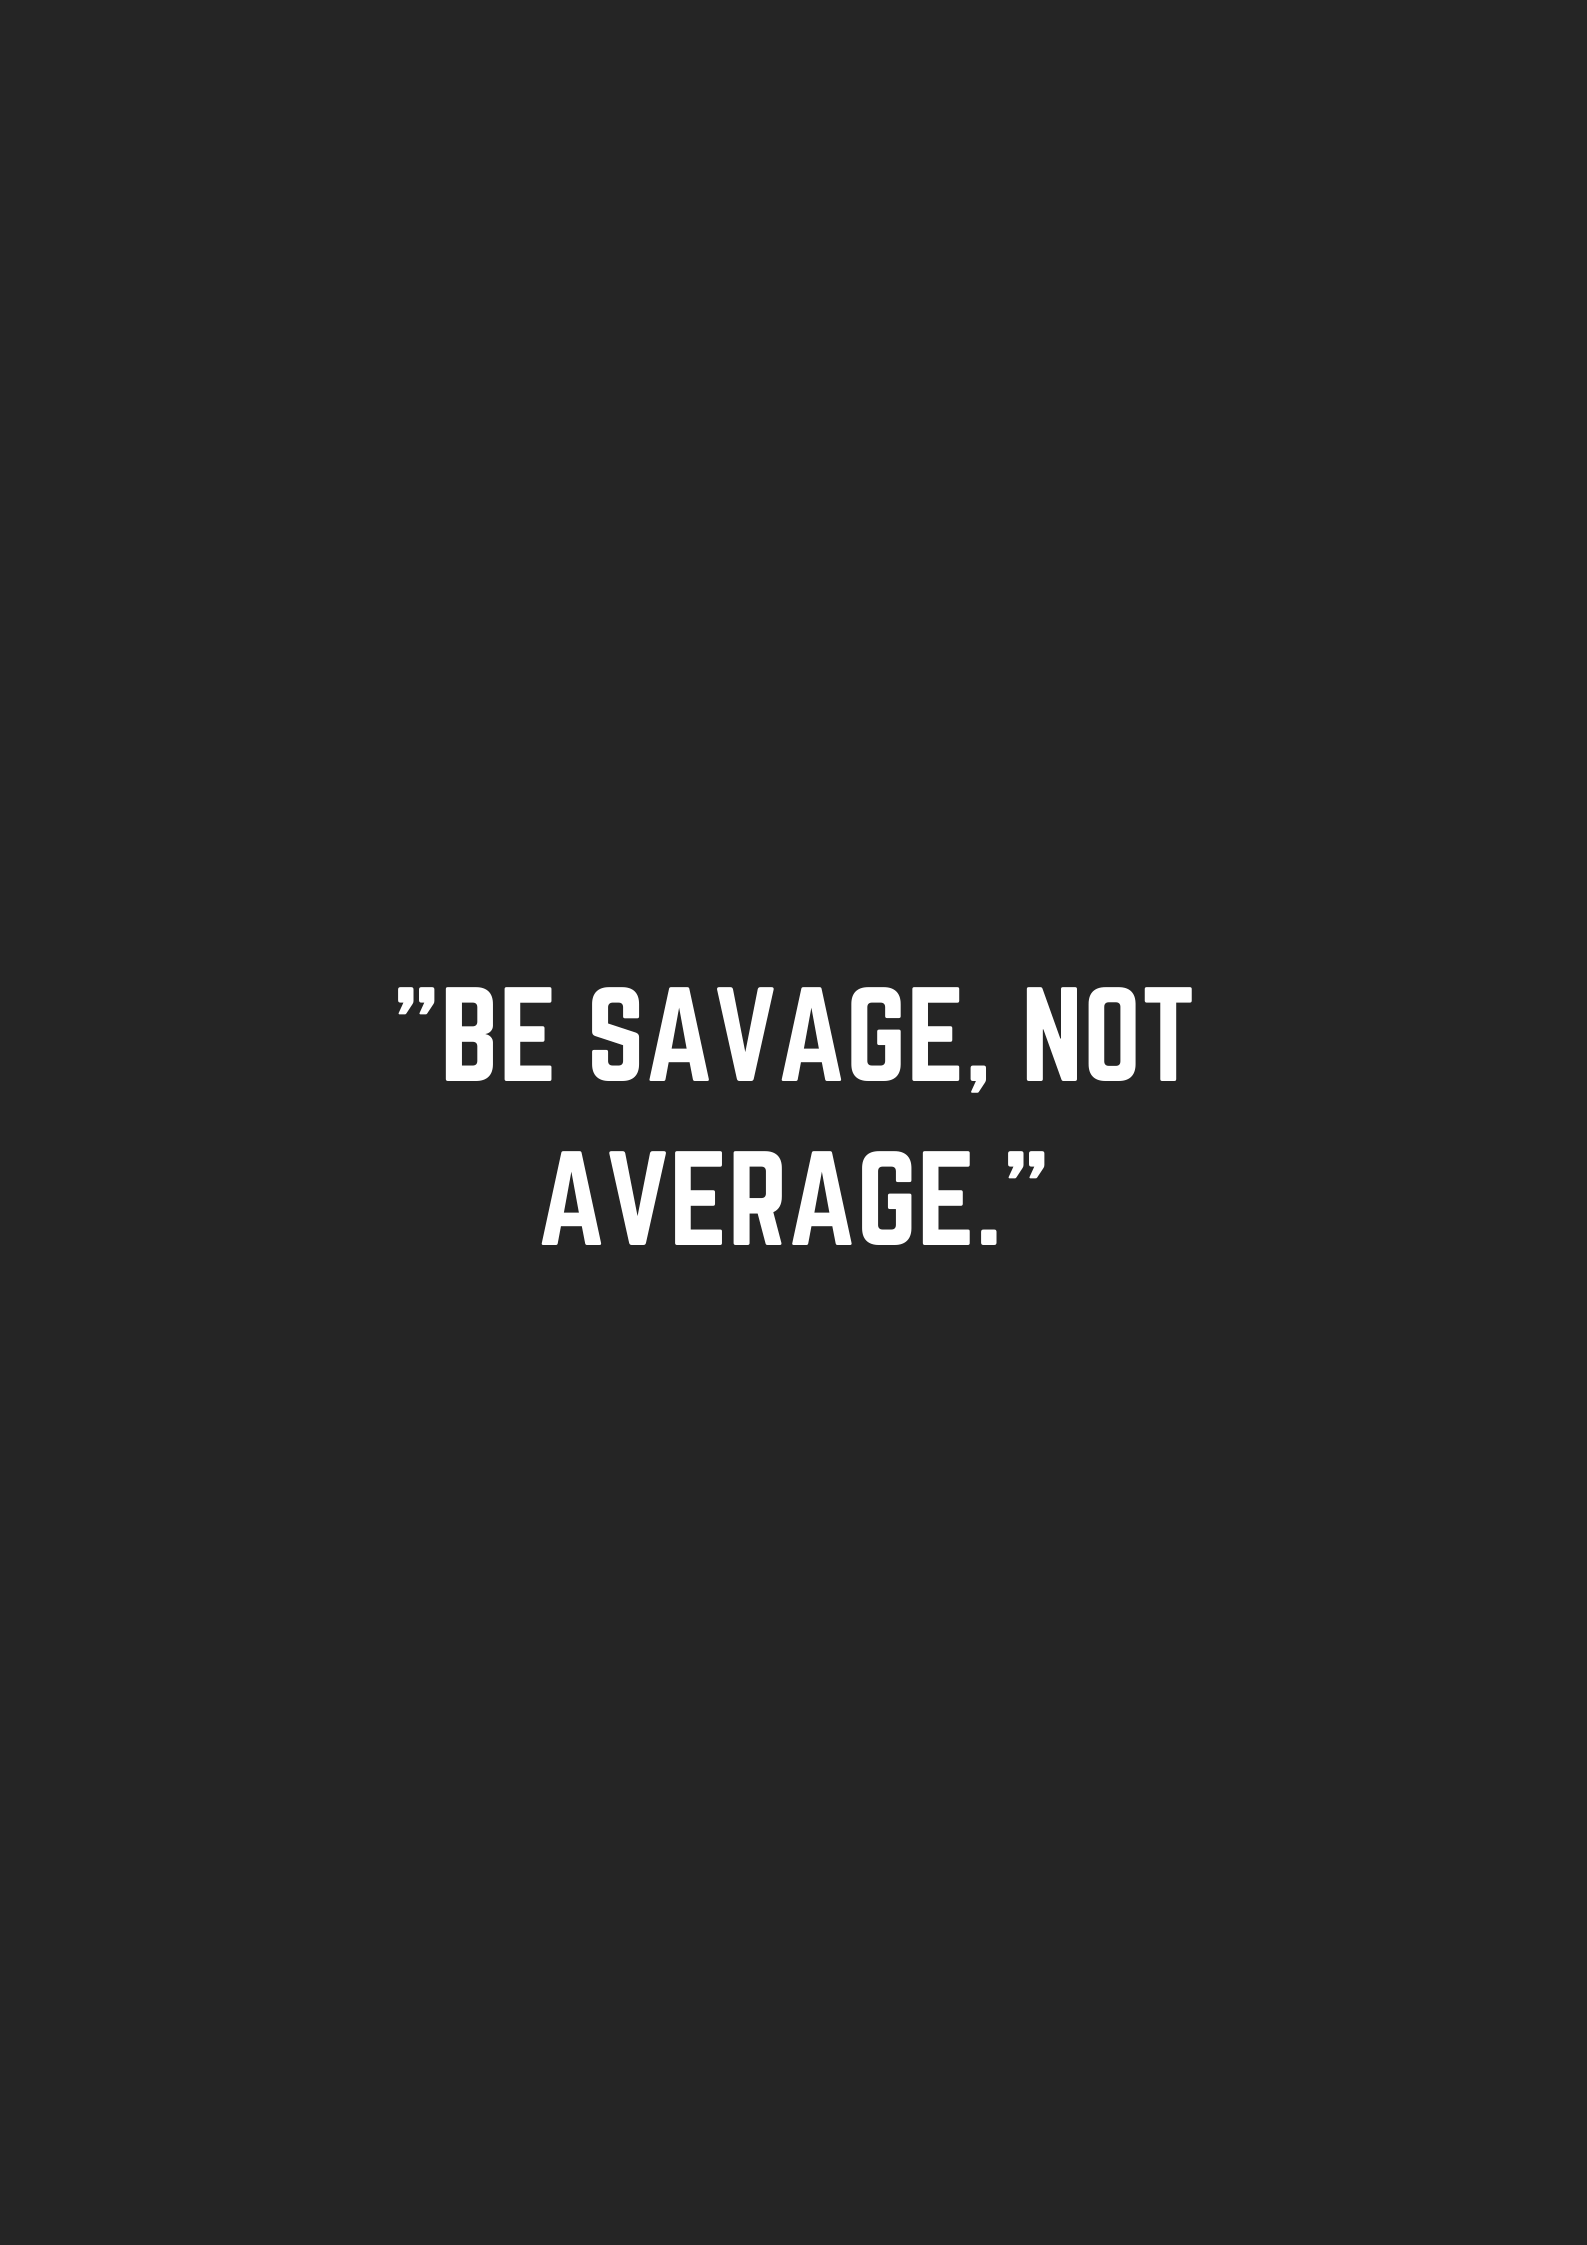 100+] Savage Quotes Wallpapers